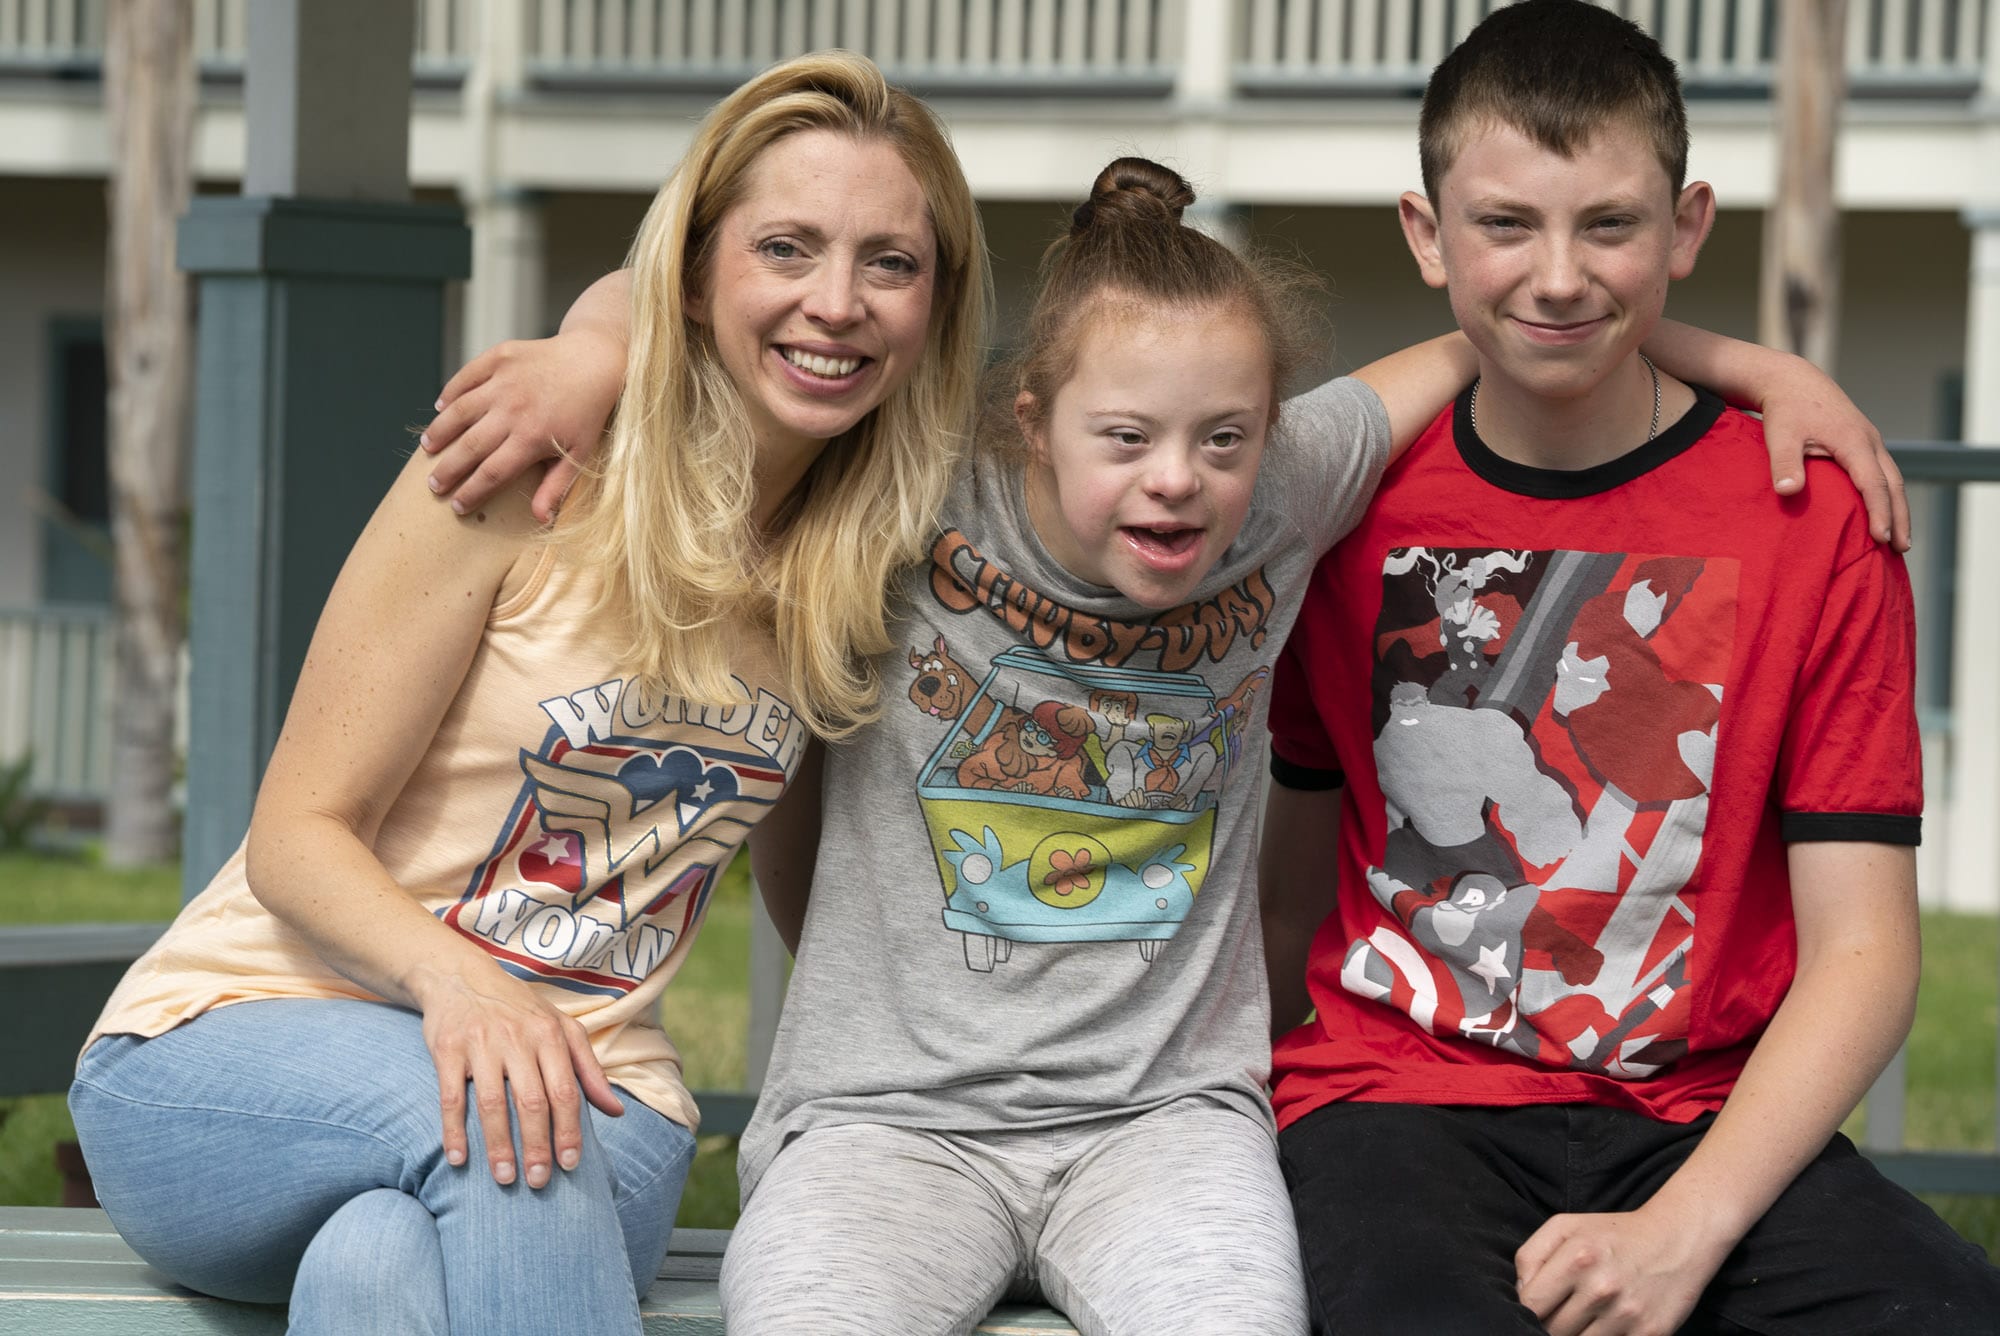 A picture of Shauna Amick with her daughter, Sarah, who has down syndrome and her young son.